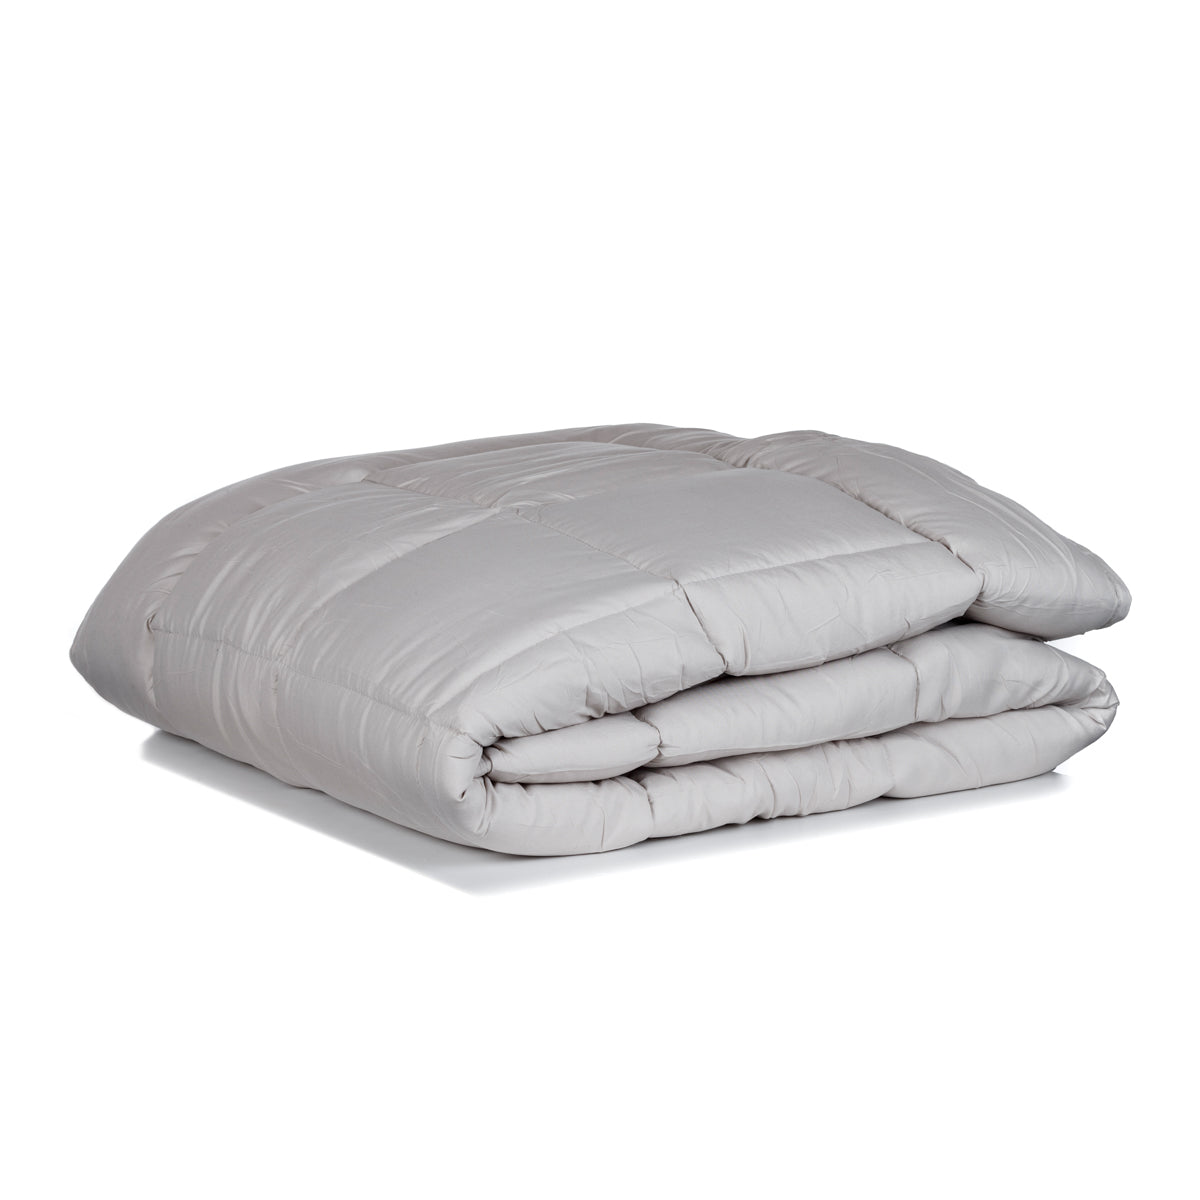 Zelesta-Easybed - Lightgrey-Seagreen-washable-quilt-2-in-1-without-cover